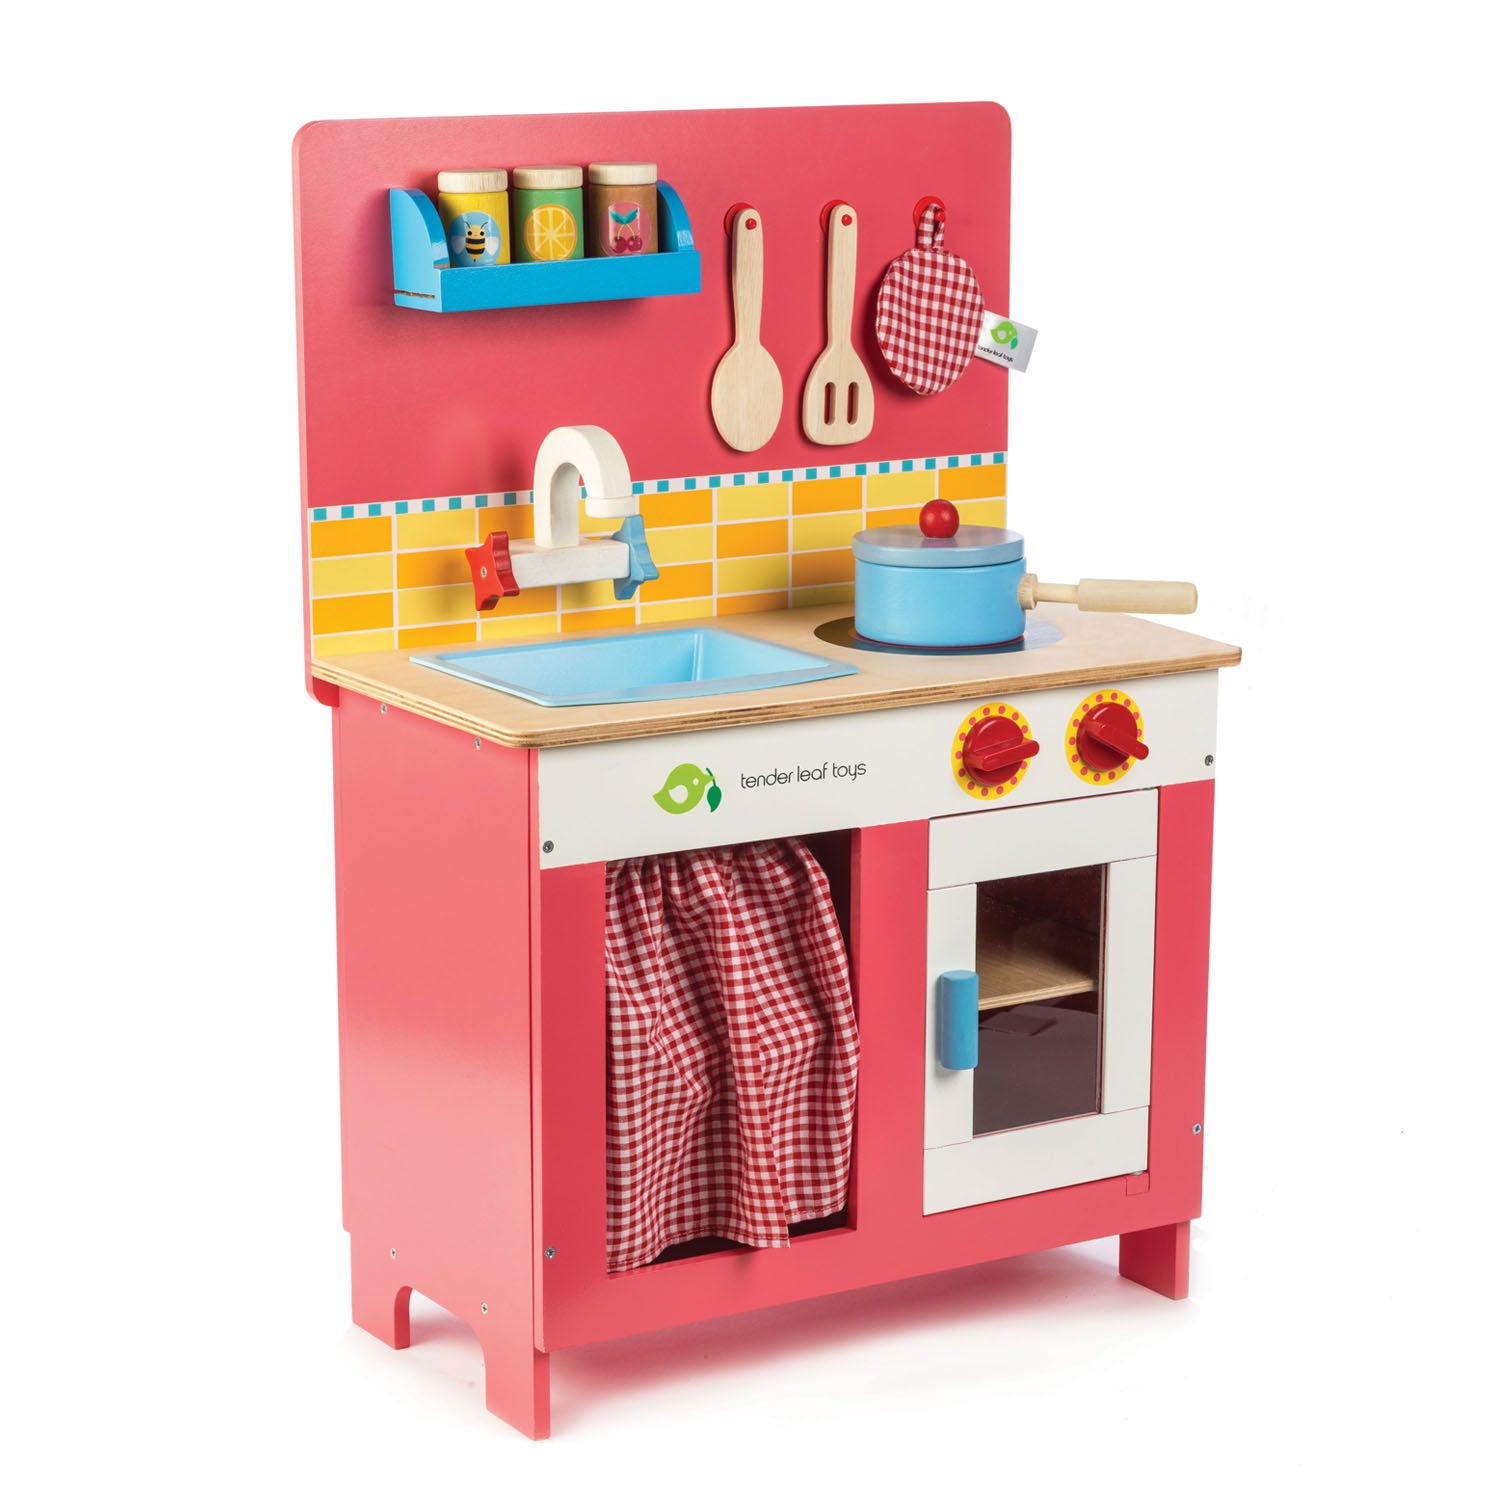 <p>Let the feast begin! Whether it is baking in the oven or cooking on the hob, it&#39;s time to prepare your favourite meal for the family! This kitchen is the perfect height for children from age 3 or above, we are sure that your young chef will enjoy the bright colors and all the wooden utensils in this kitchen set.</p>
<p>Self Assembly is required.</p>
<p>Age range: 3 Years And Older  </p>
<p>Product size: 16.93&quot; x 9.65&quot; x 24.72&quot;  </p>
<p>Weight: 14.30 lbs</p>
